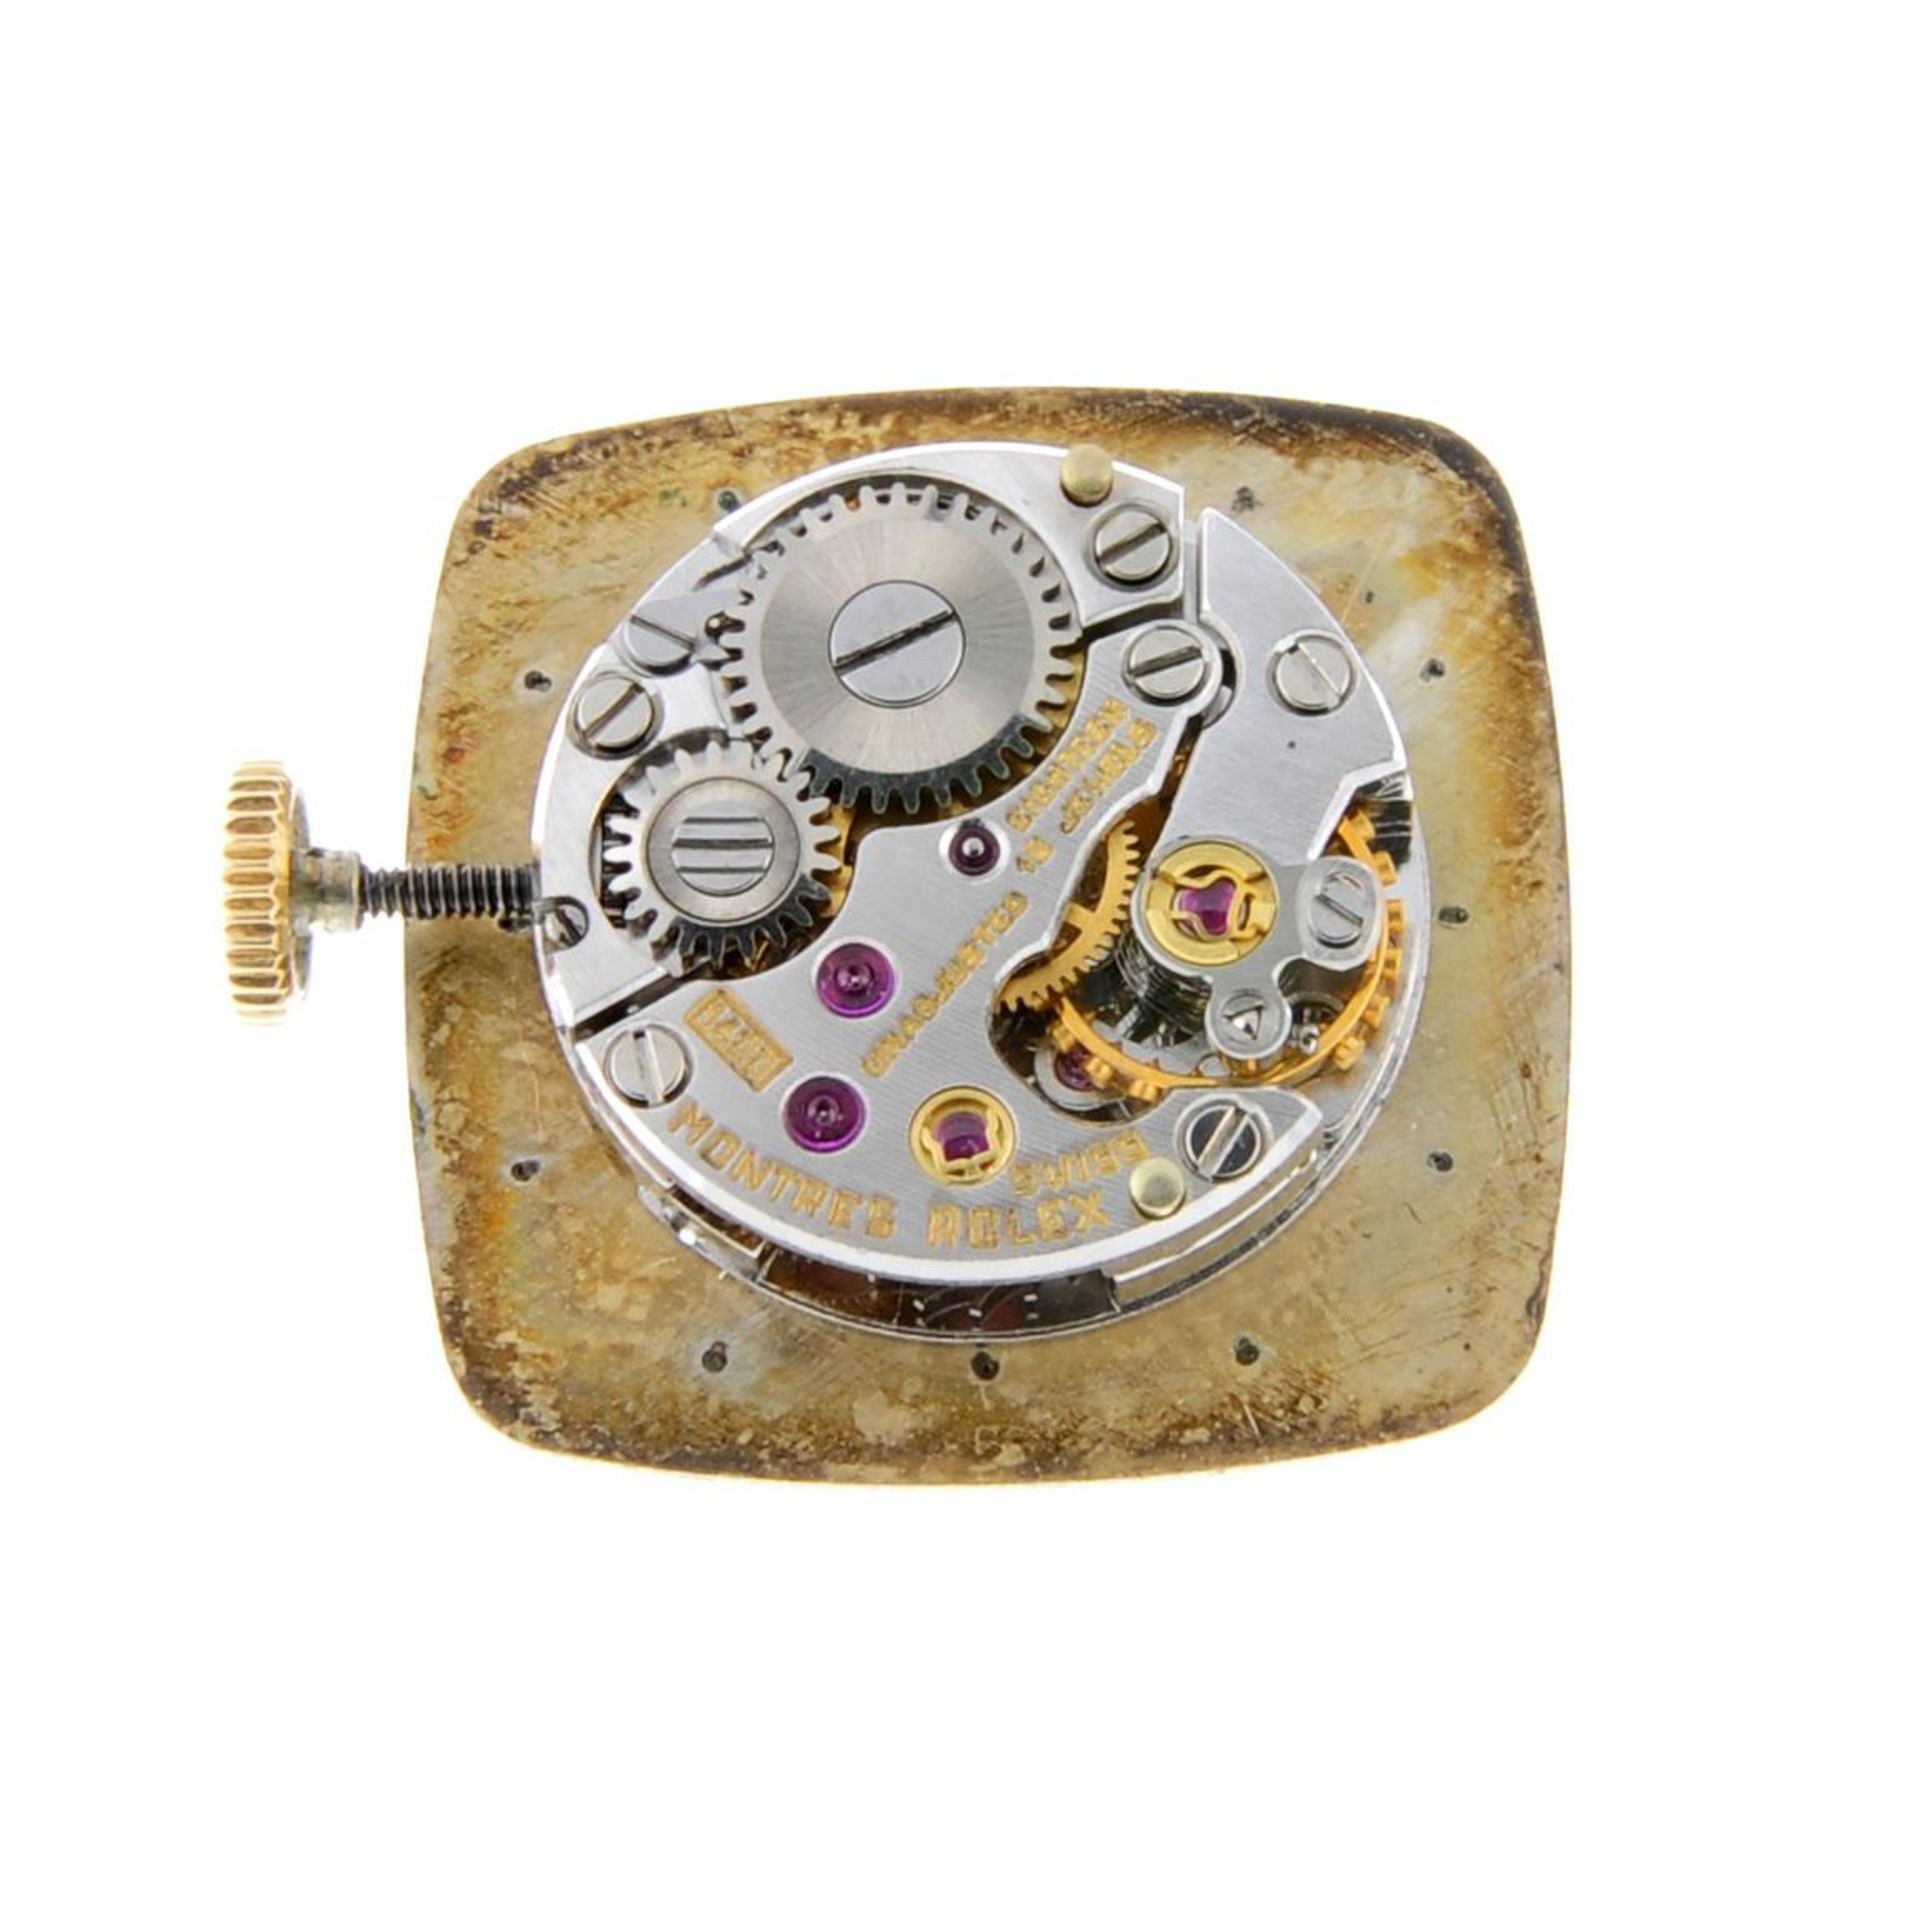 ROLEX - a calibre 1400 watch movement with dial and hands. - Image 2 of 2